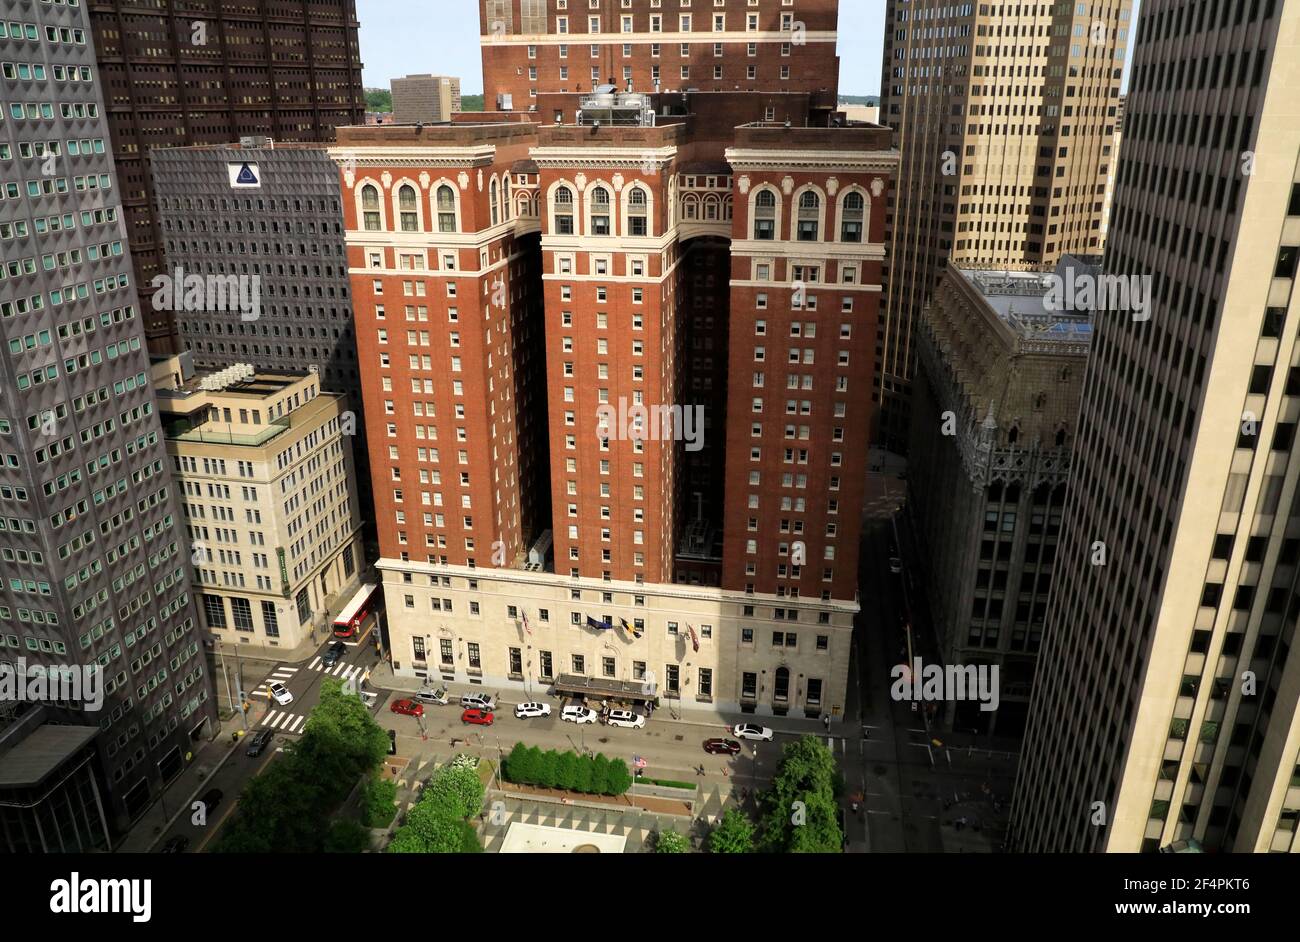 Exterior view of historic Omni William Penn Hotel in William Penn Place, Downtown Pittsburgh. Pennsylvania.USA Stock Photo